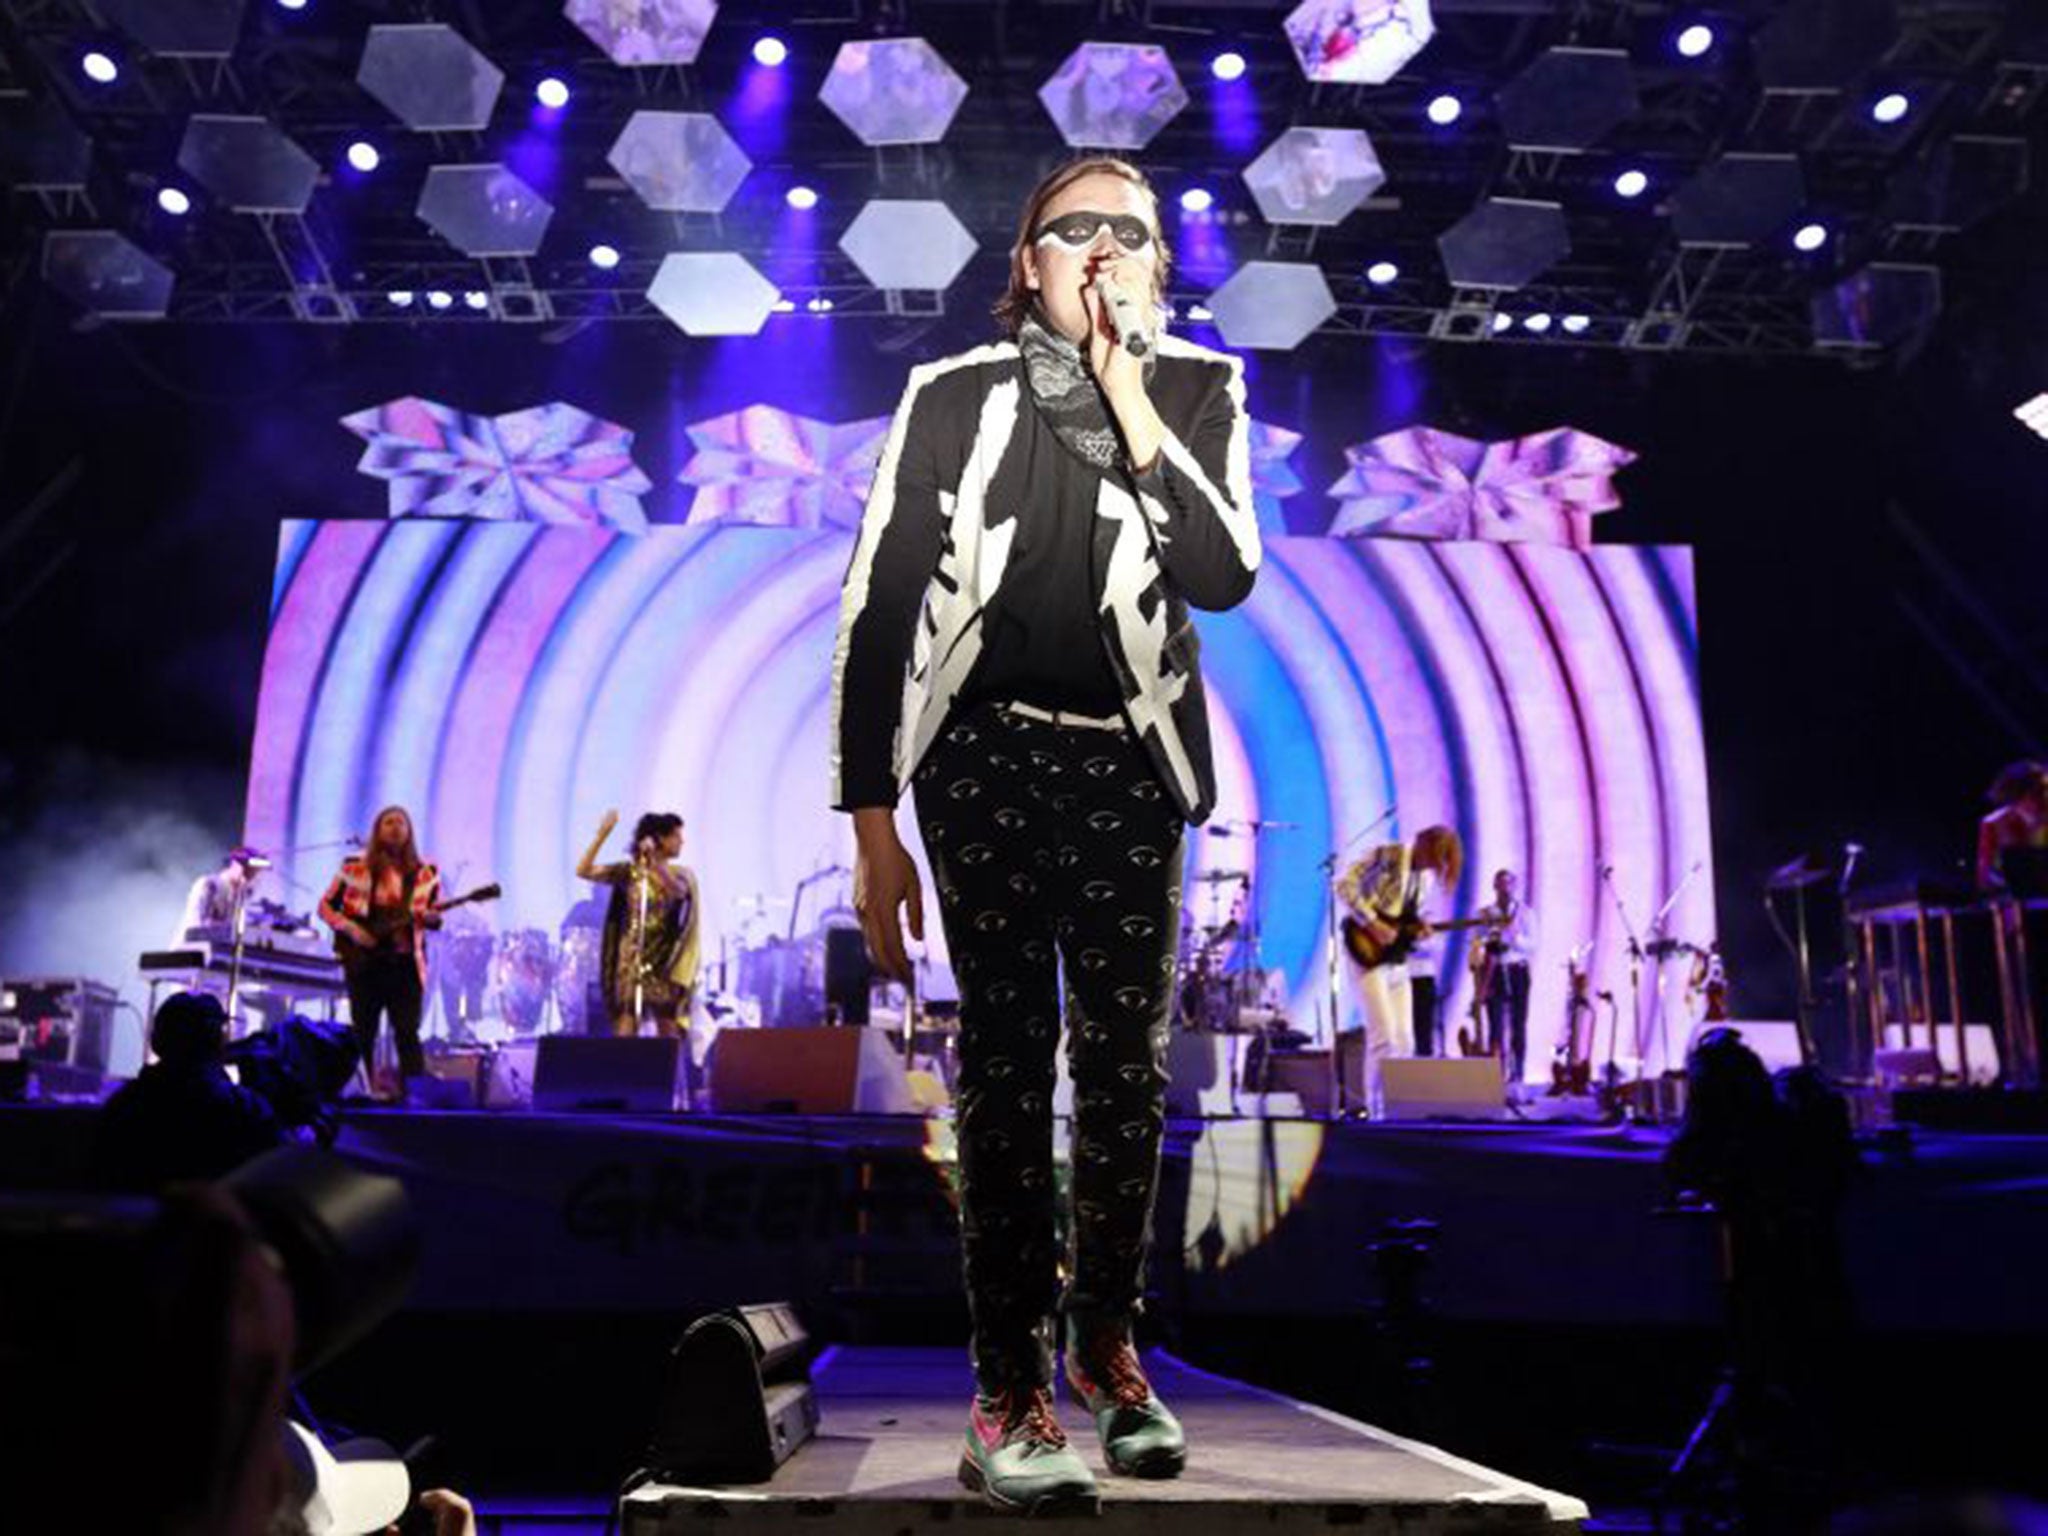 Arcade Fire did just enough to put fire in the bellies of an eager festival crowd